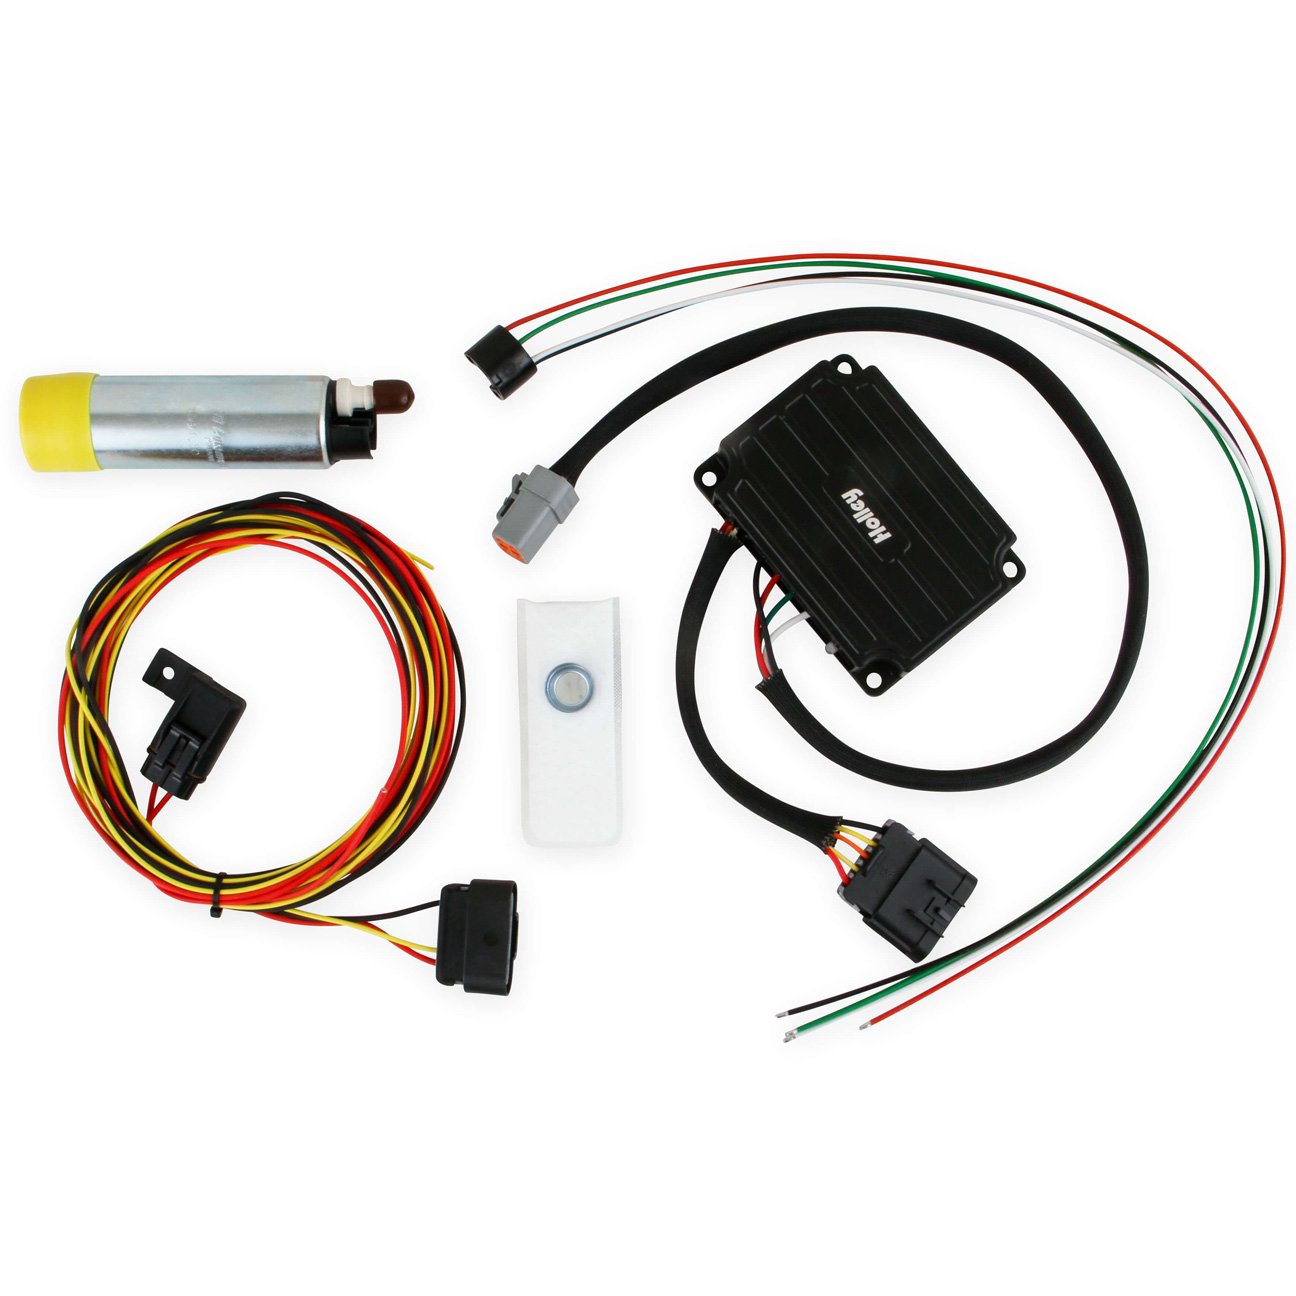 VR1 Series Brushless Fuel Pump Quick Kit